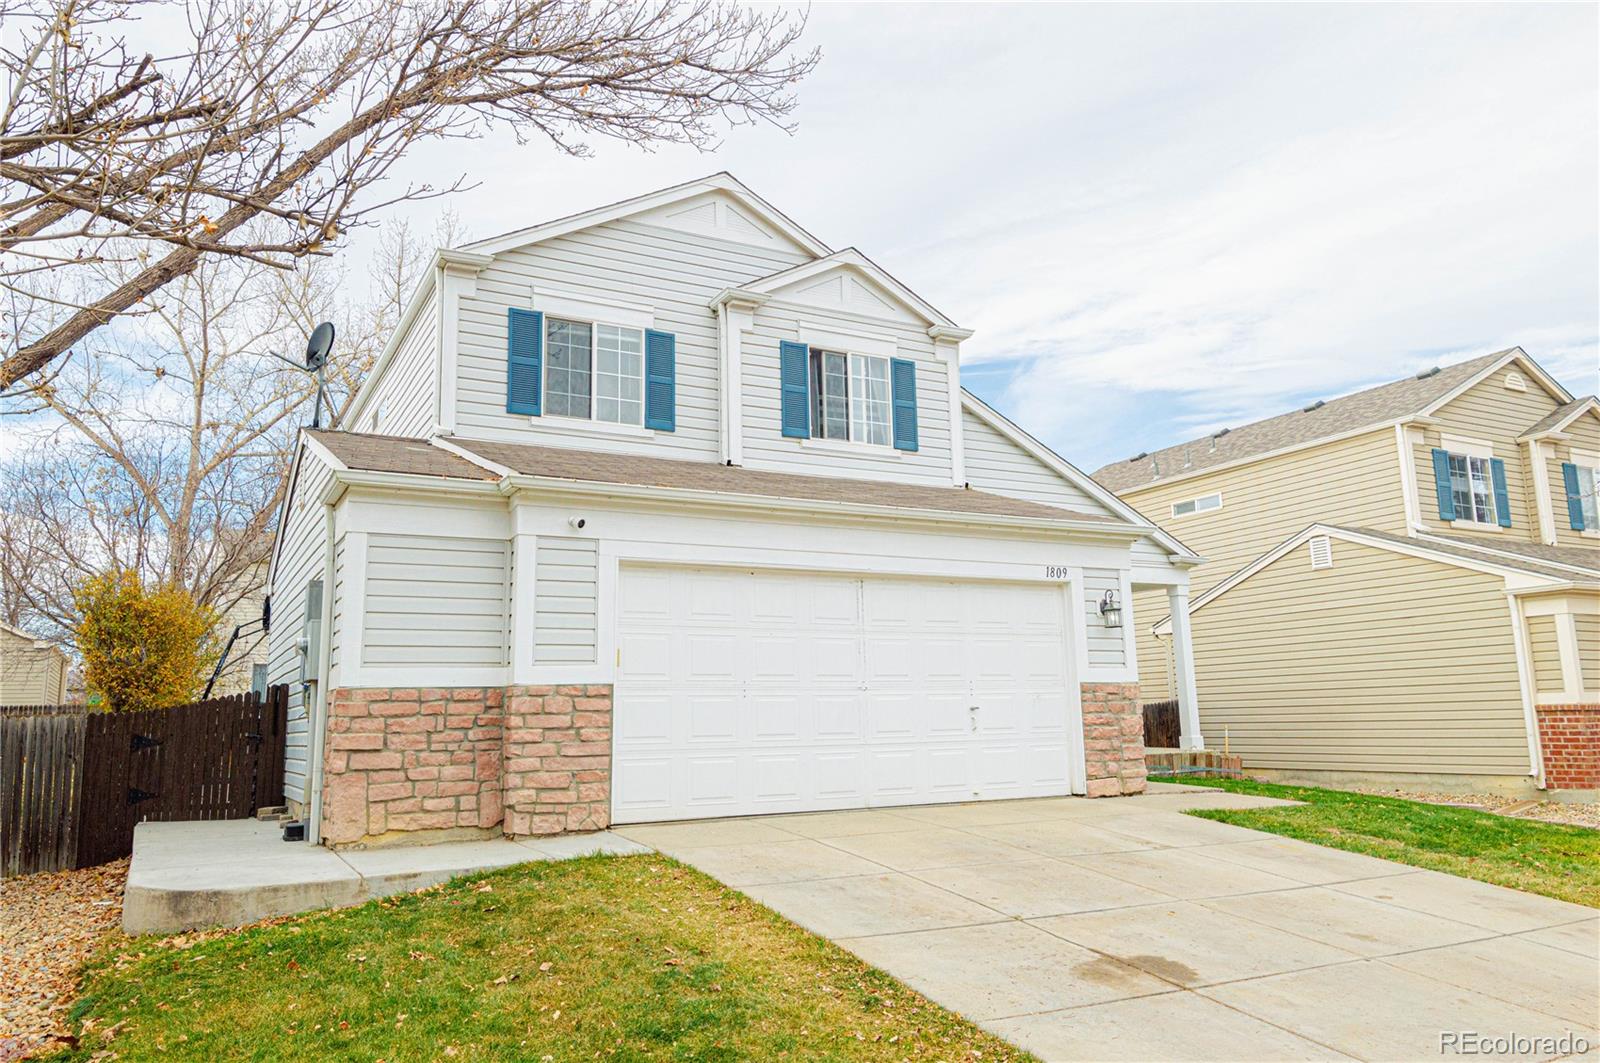 1809  clover creek drive, Longmont sold home. Closed on 2024-04-26 for $590,000.